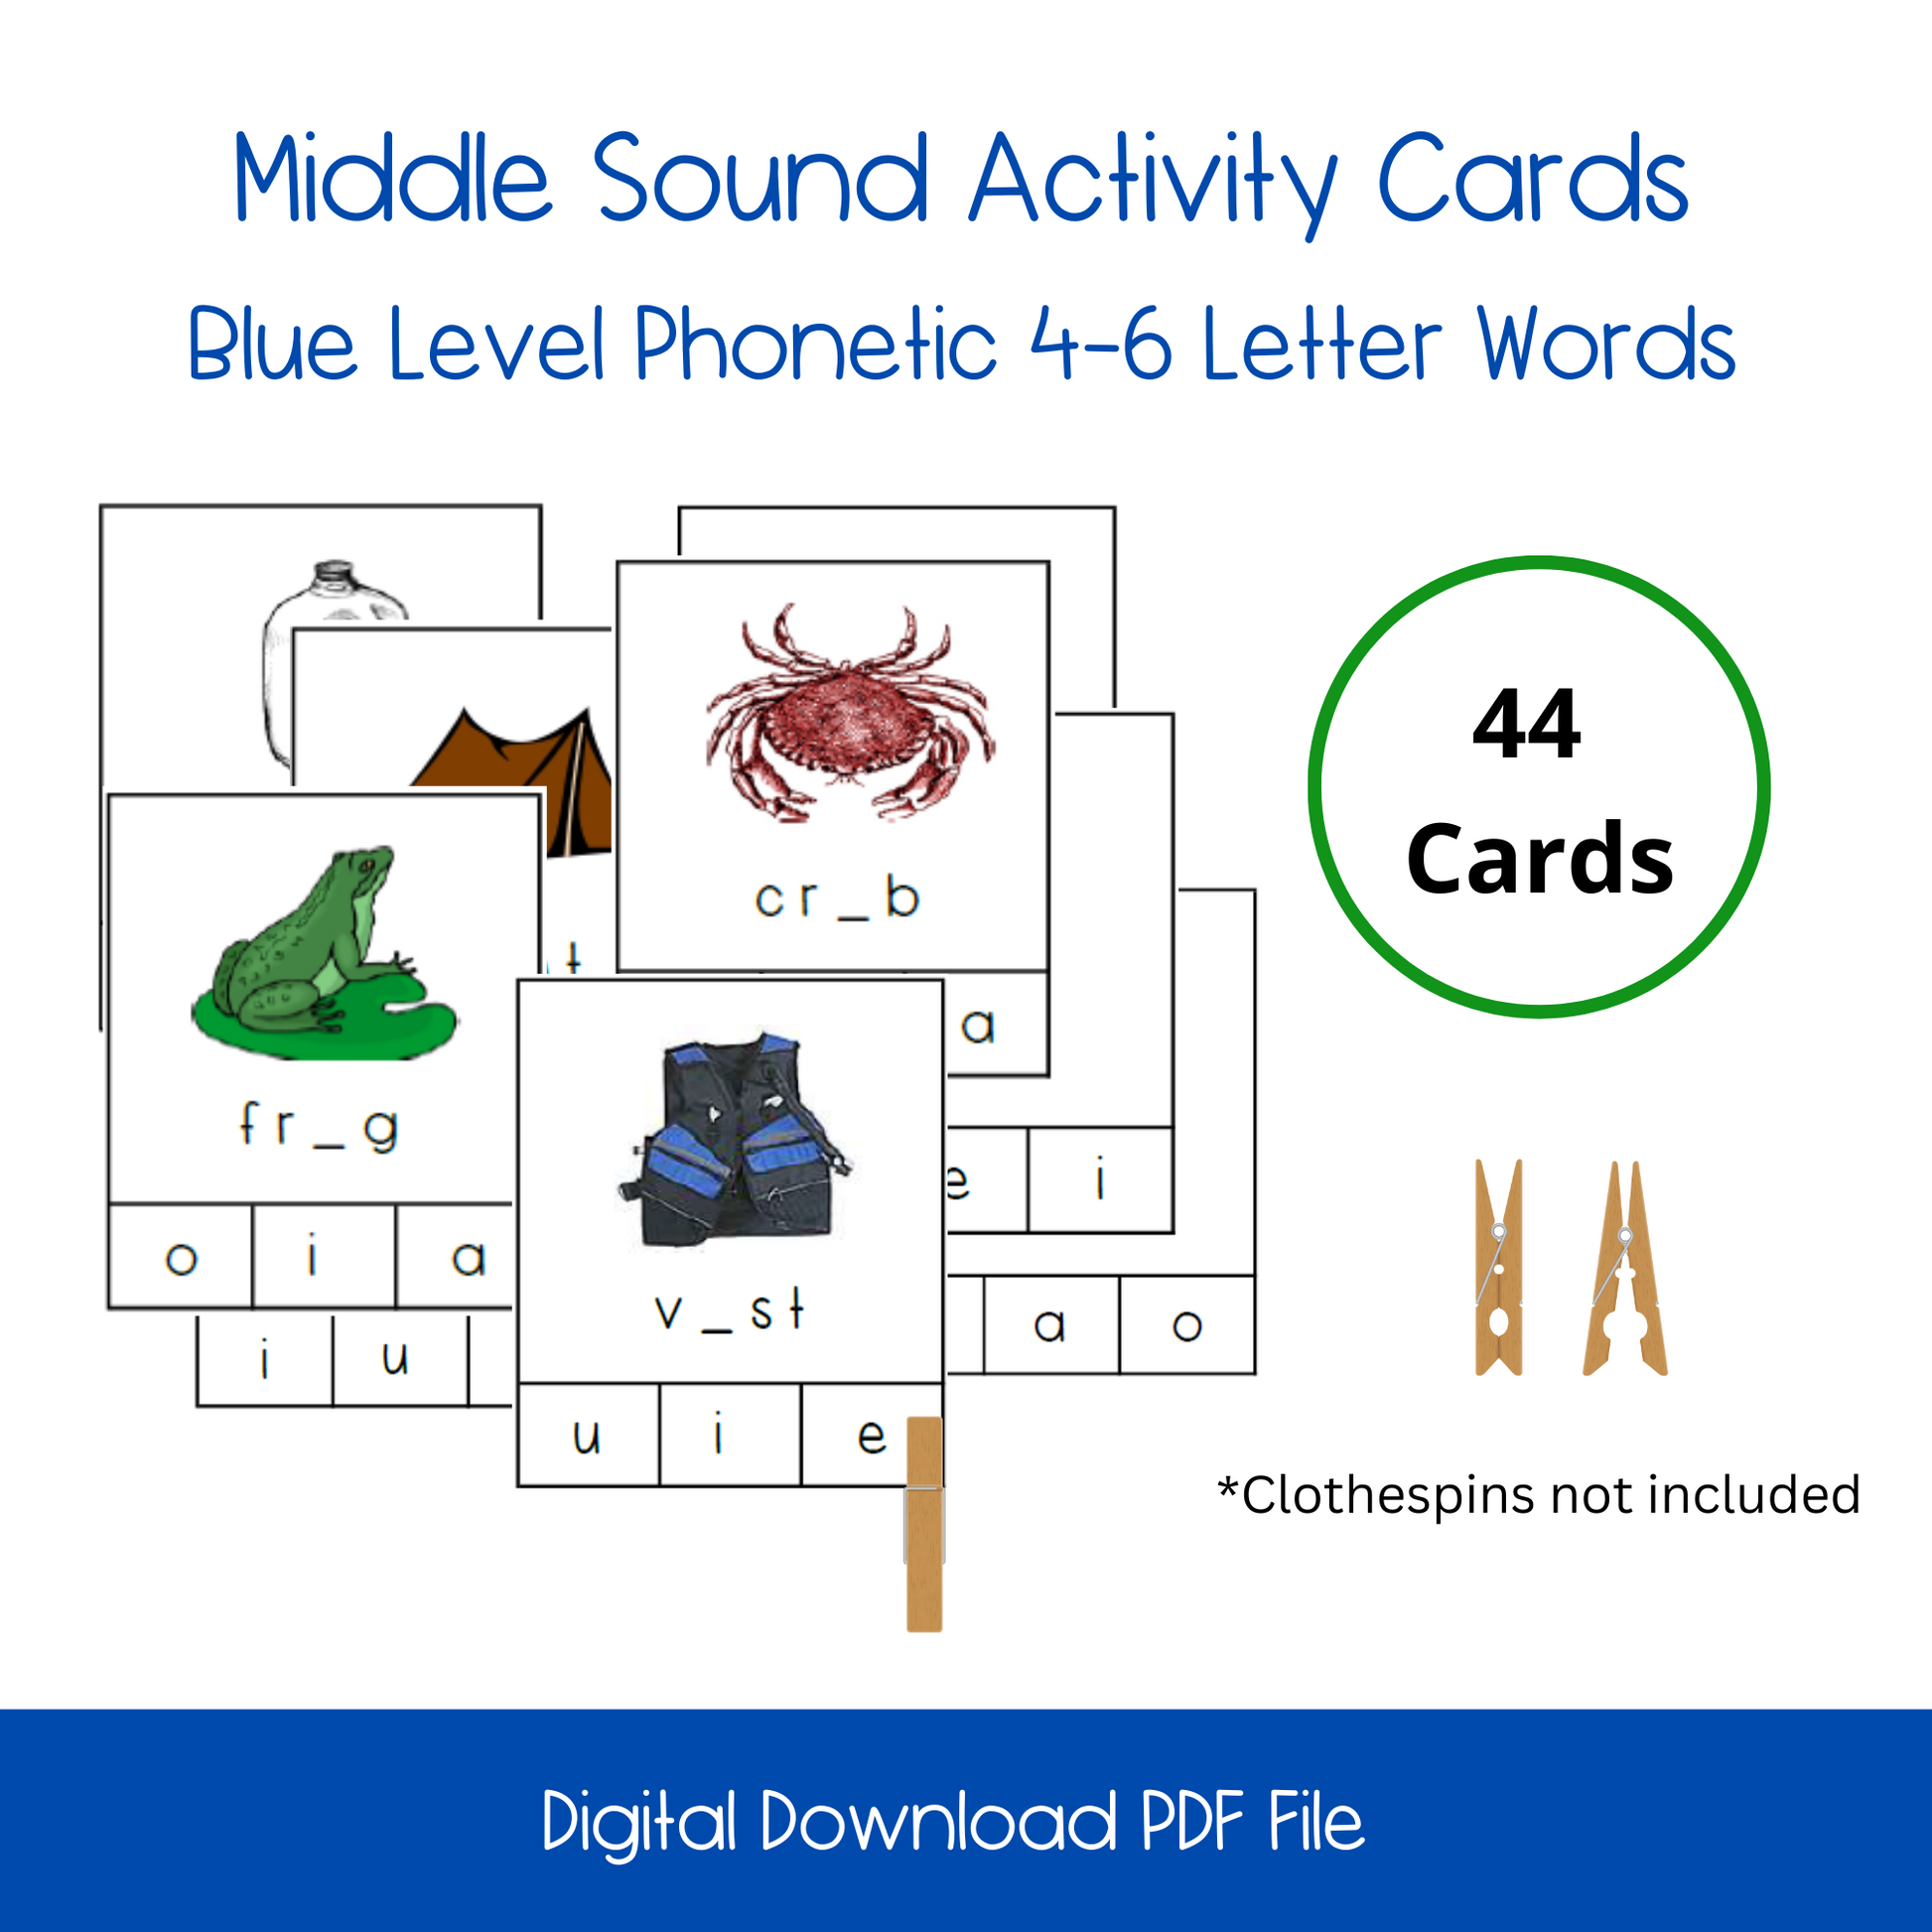 Printable Blue Level Phonetic Middle Sound Clip Cards, Printable Montessori Blue Level Phonetic Middle Sound Clip Cards, Printable ESL Blue Level Phonetic Middle Sound Clip Cards, Printable Montessori Blue Level Phonetic Middle Sound Clip Cards, Printable Homeschool Blue Level Phonetic Middle Sound Cards, Printable Montessori Blue Level Phonetic Middle Sound Cards, Printable Kindergarten Blue Level Phonetic Middle Sound Cards, Printable Montessori Blue Level Phonetic Middle Sound Cards